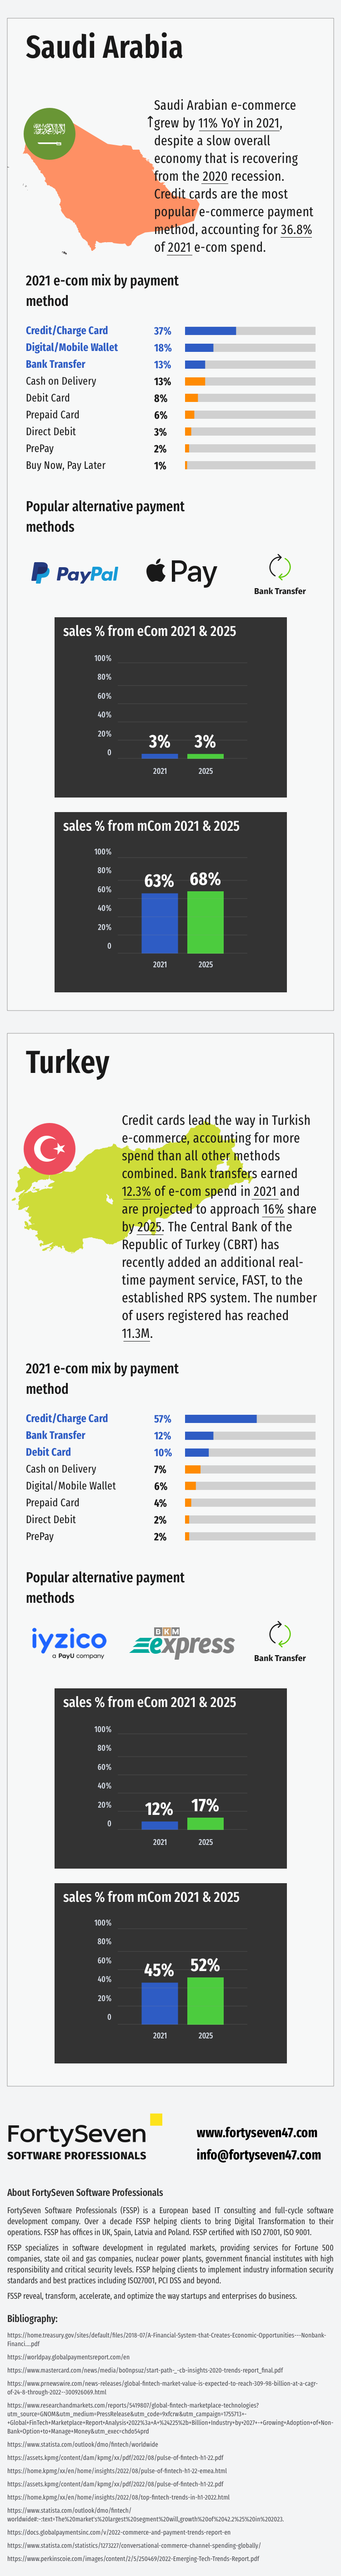 Infographic: Fintech Overview & Trends 2022 - 2023 - 31